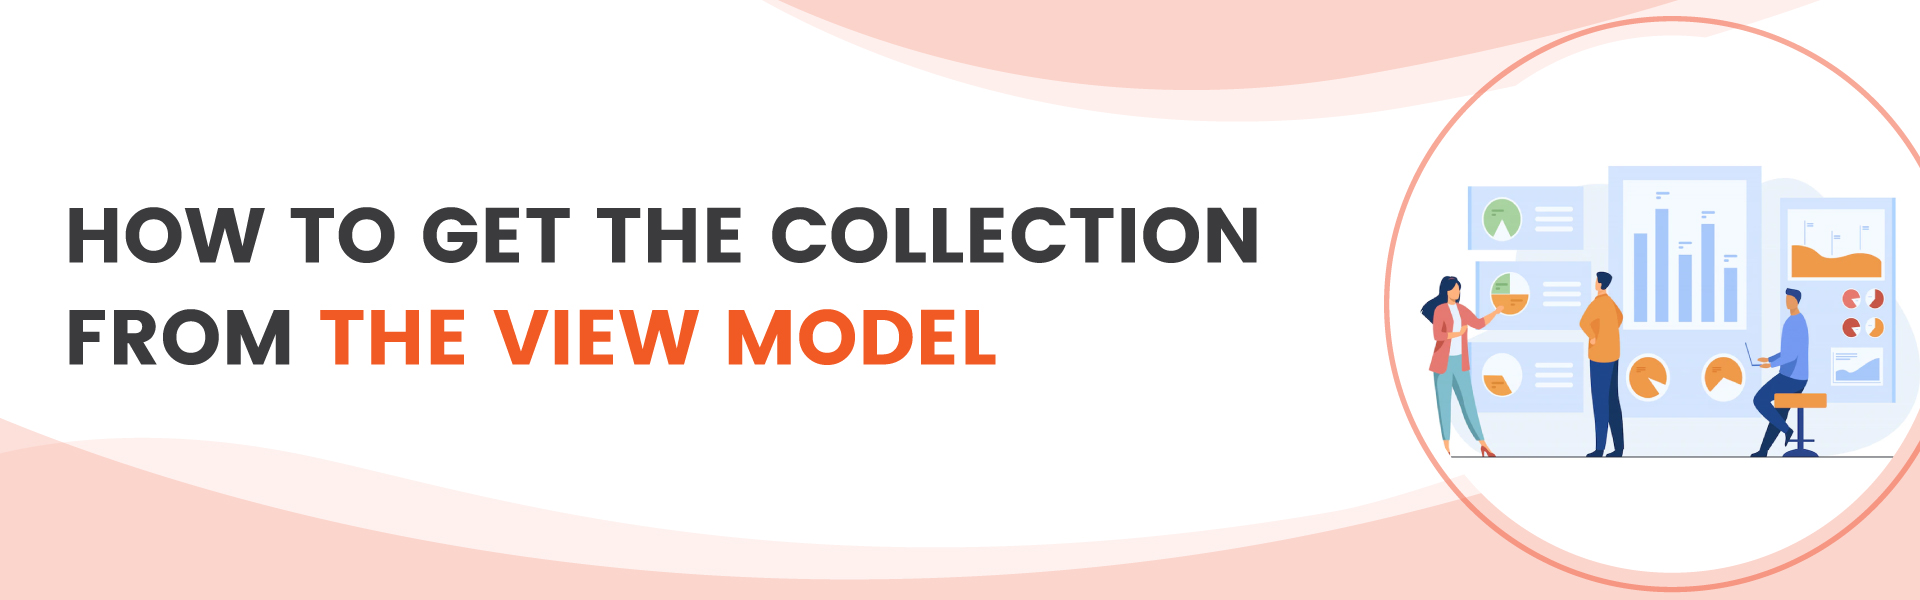 collection from the ViewModel